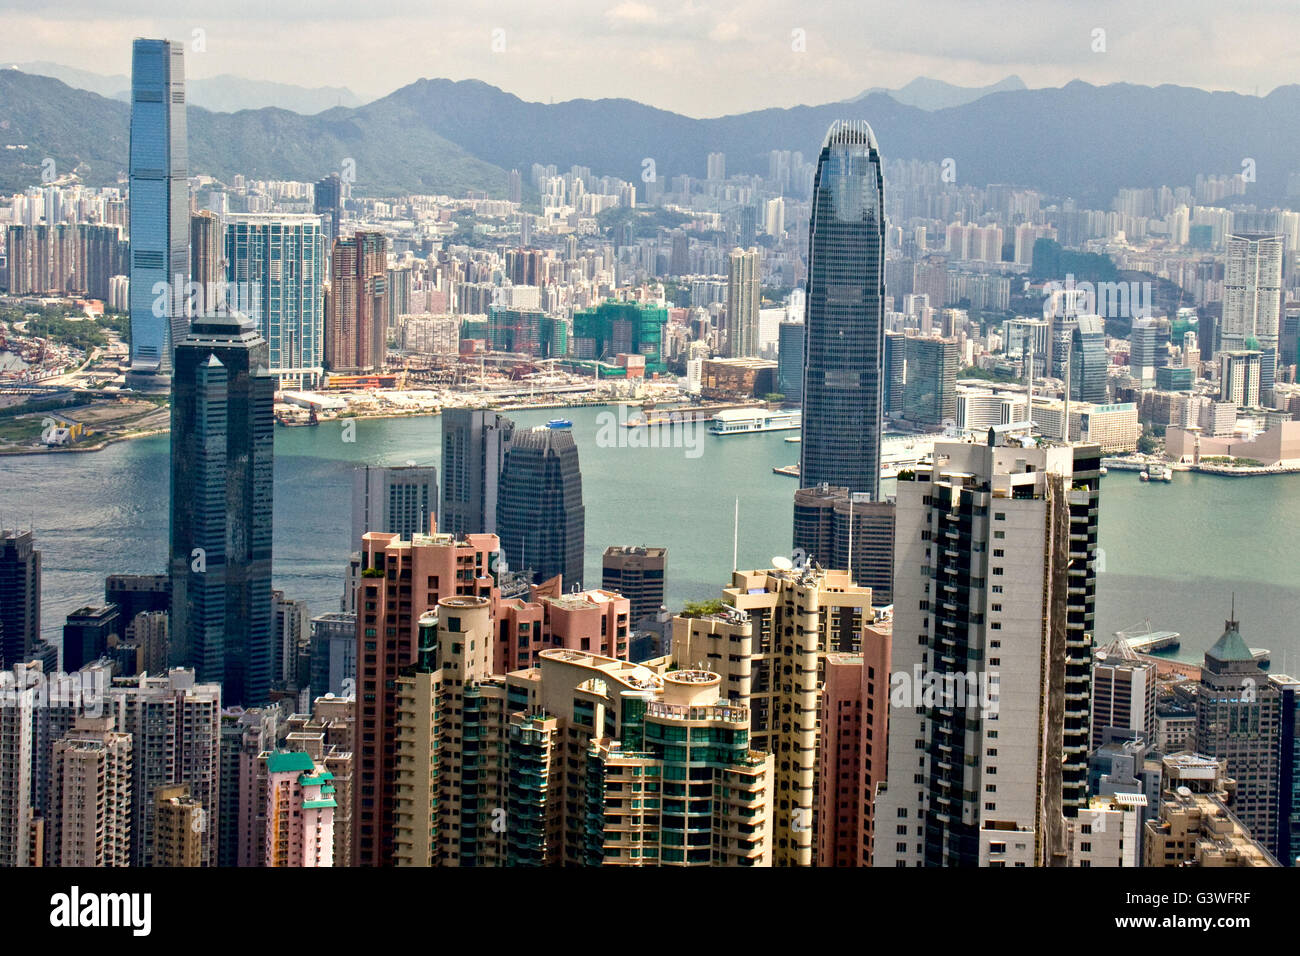 View of the city of Hong Kong with a mountain peak 'Victoria'. Stock Photo